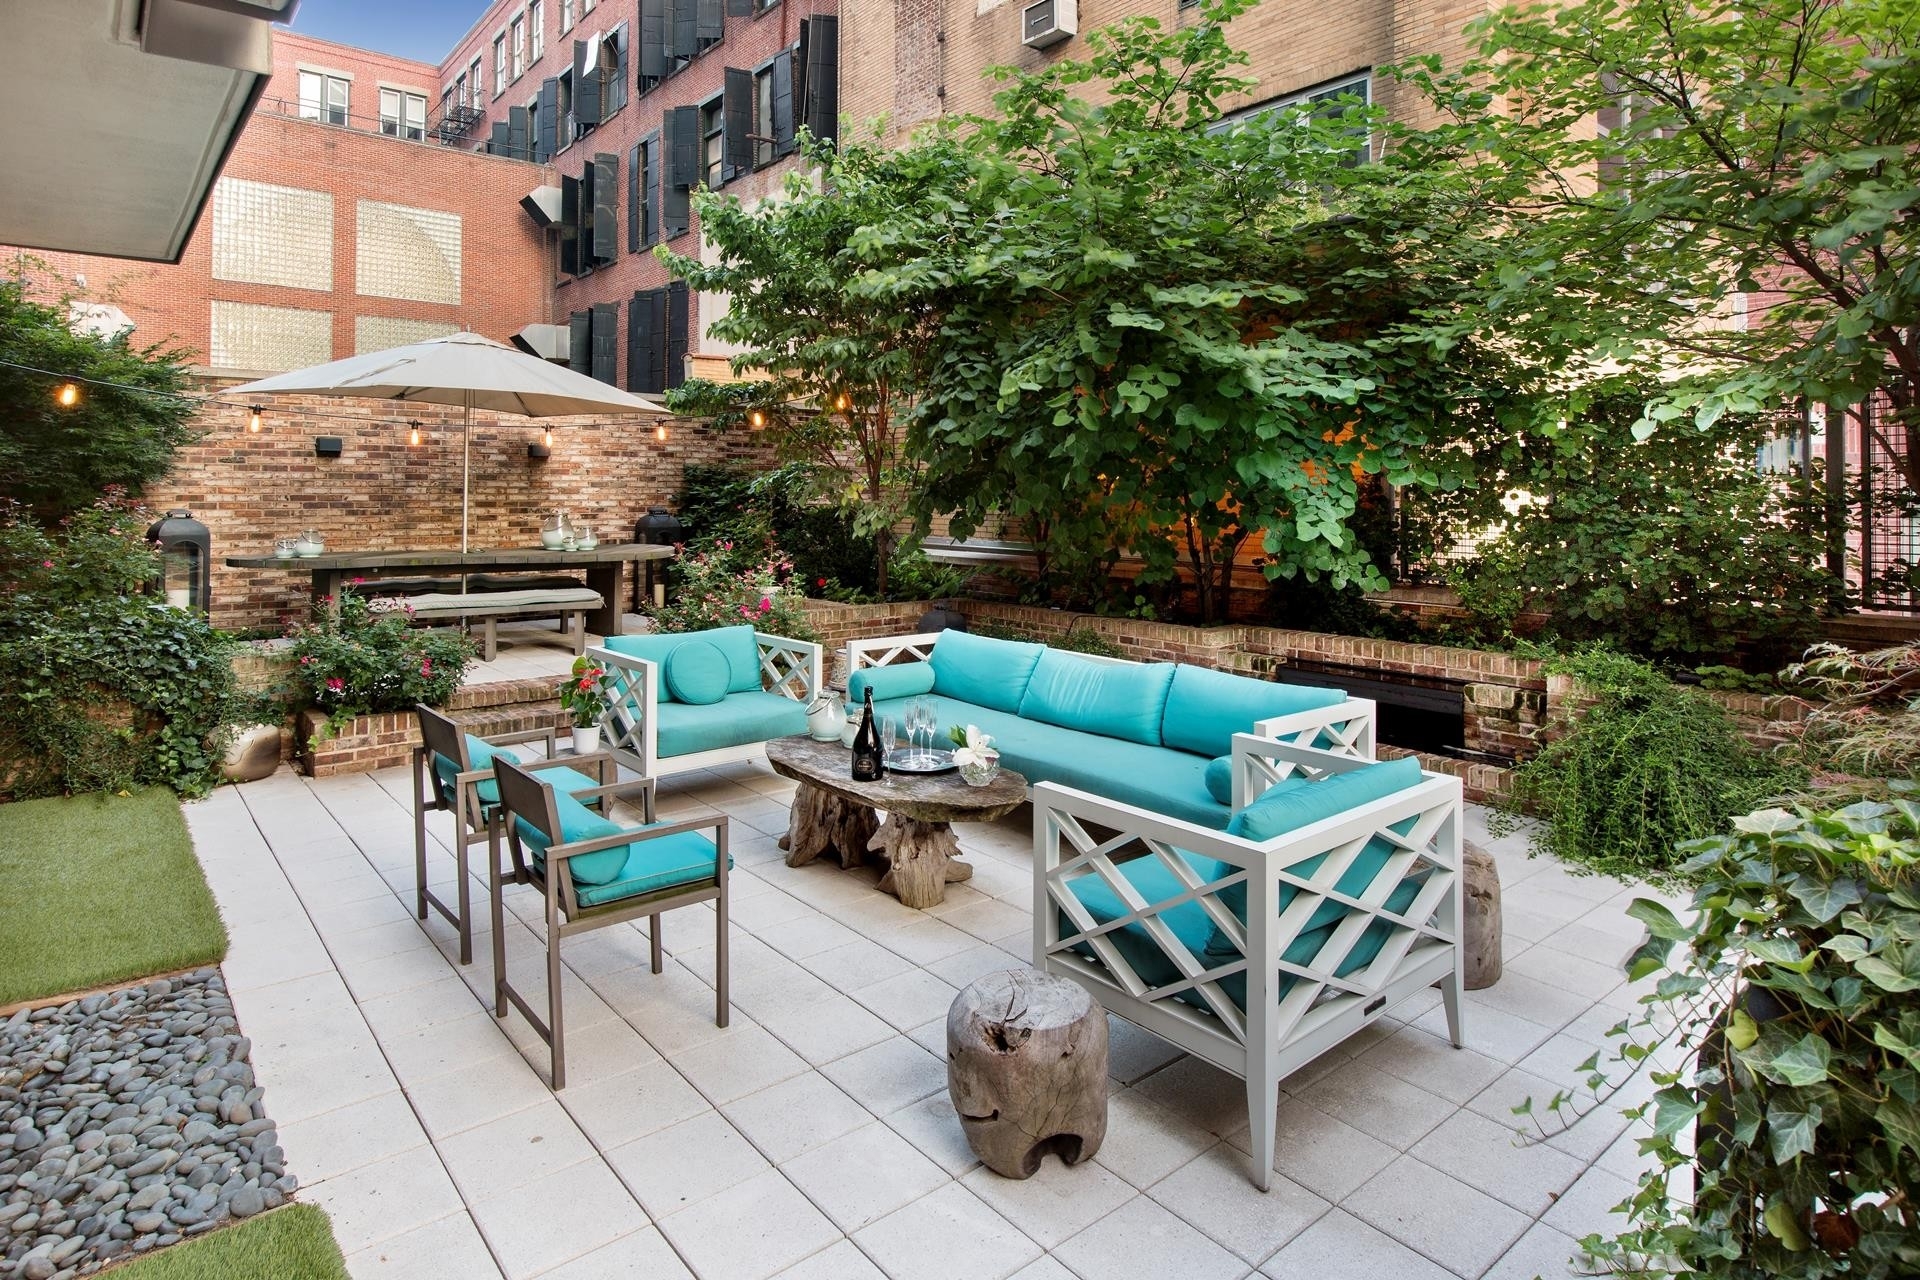 Condominium for Sale at Citizen, 124 W 23RD ST, 2A Chelsea, New York, NY 10011